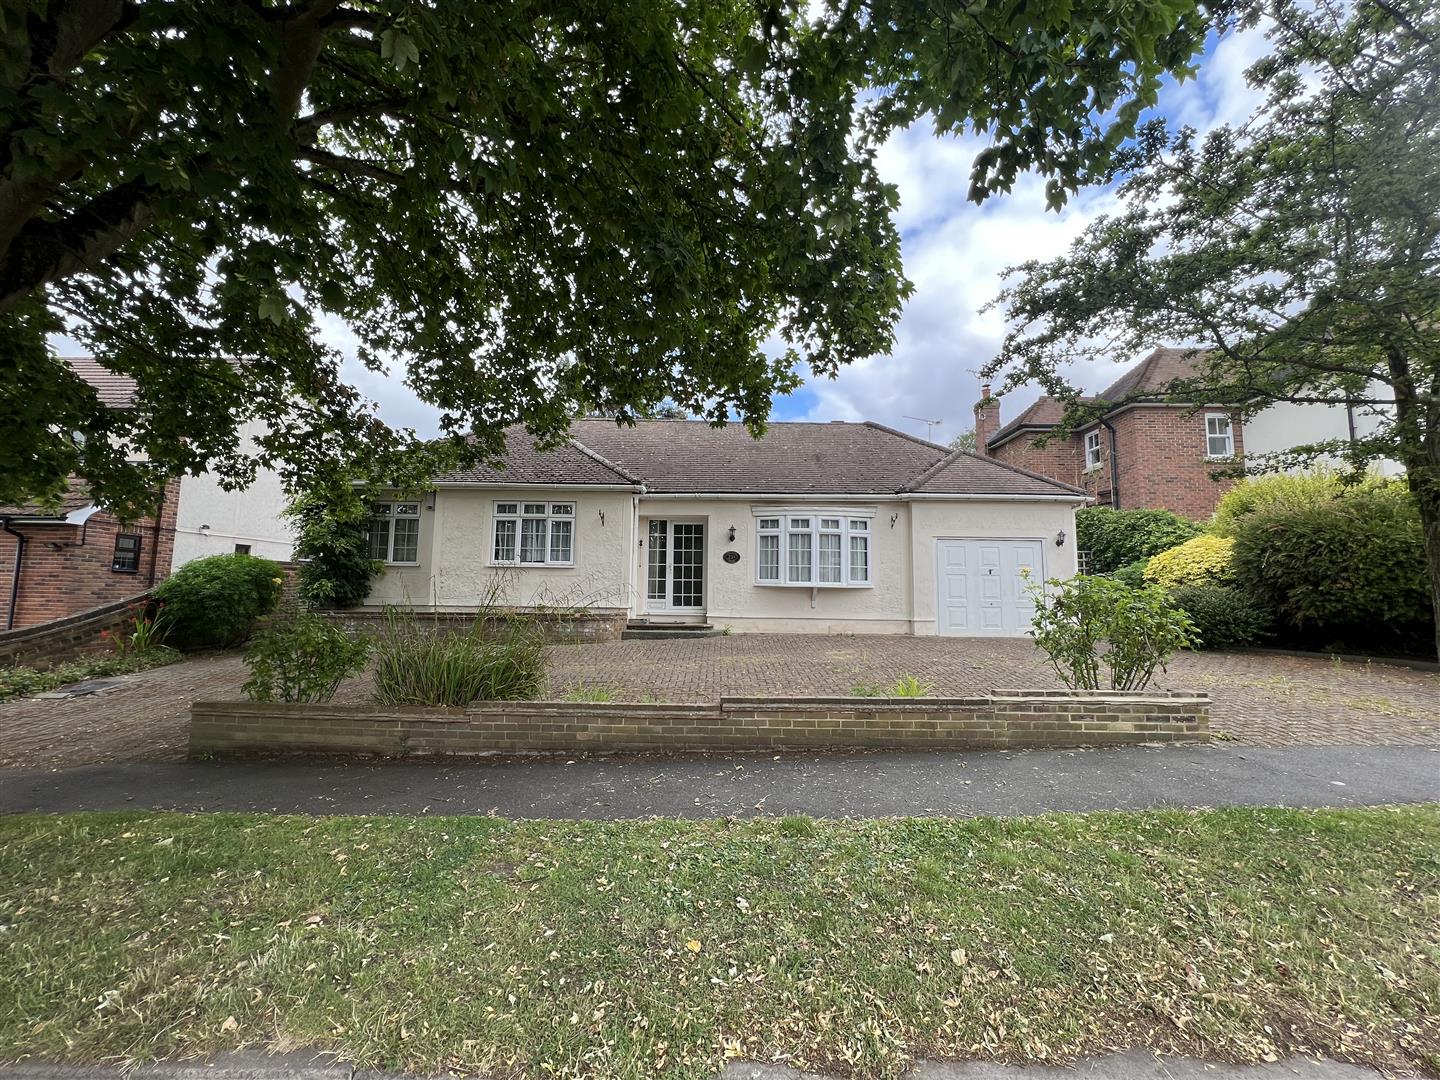 Shenfield Crescent Brentwood Brentwood CM15